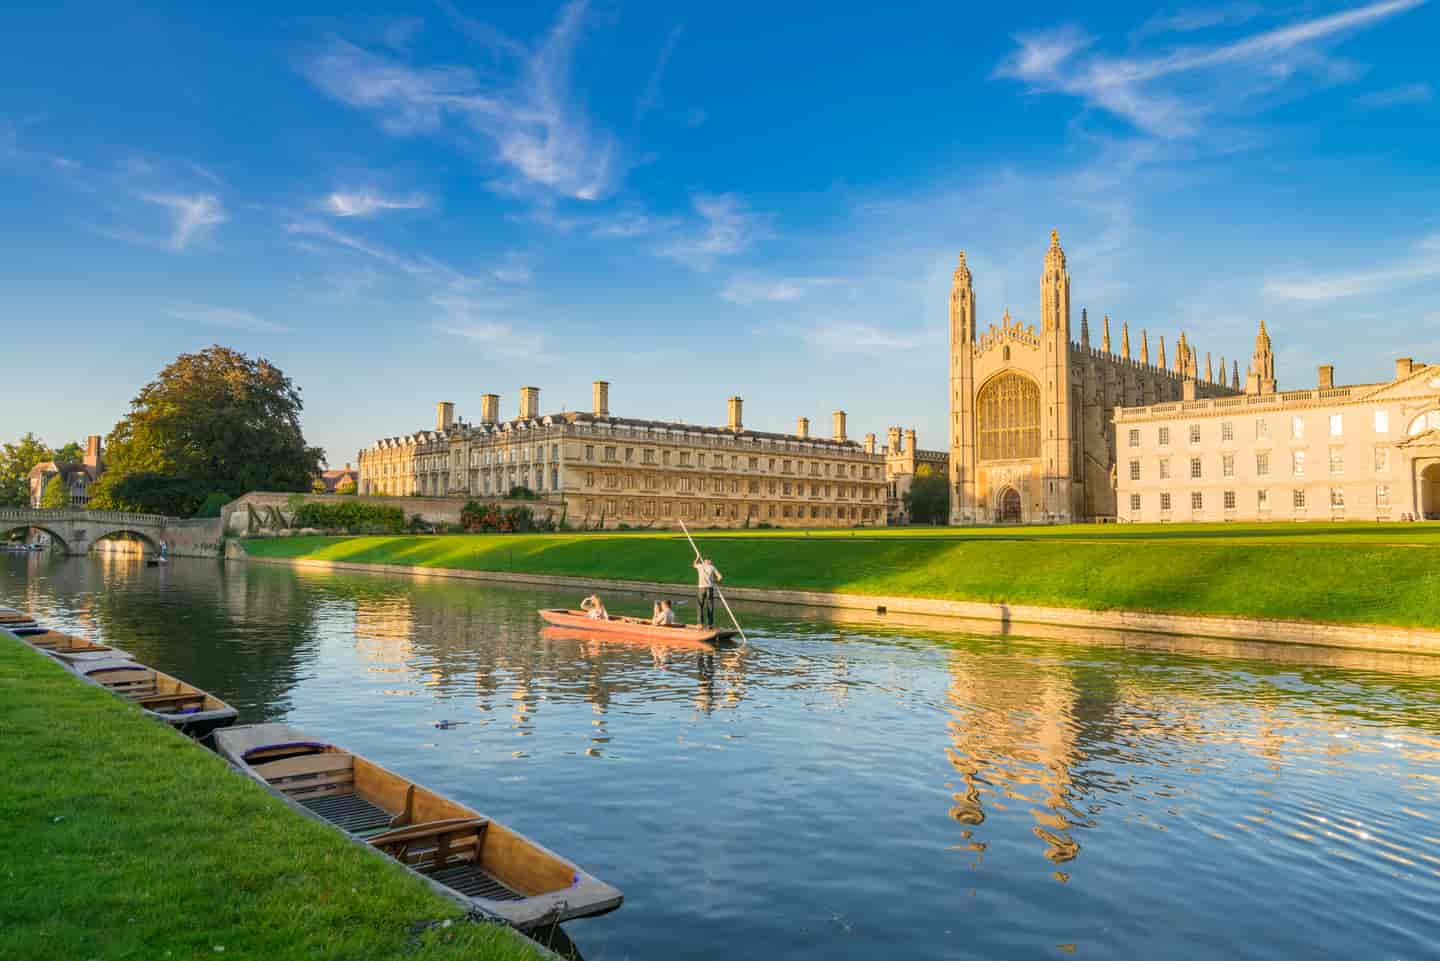 Student Accommodation in Cambridge - Clare College and King's College beyond the River Cam